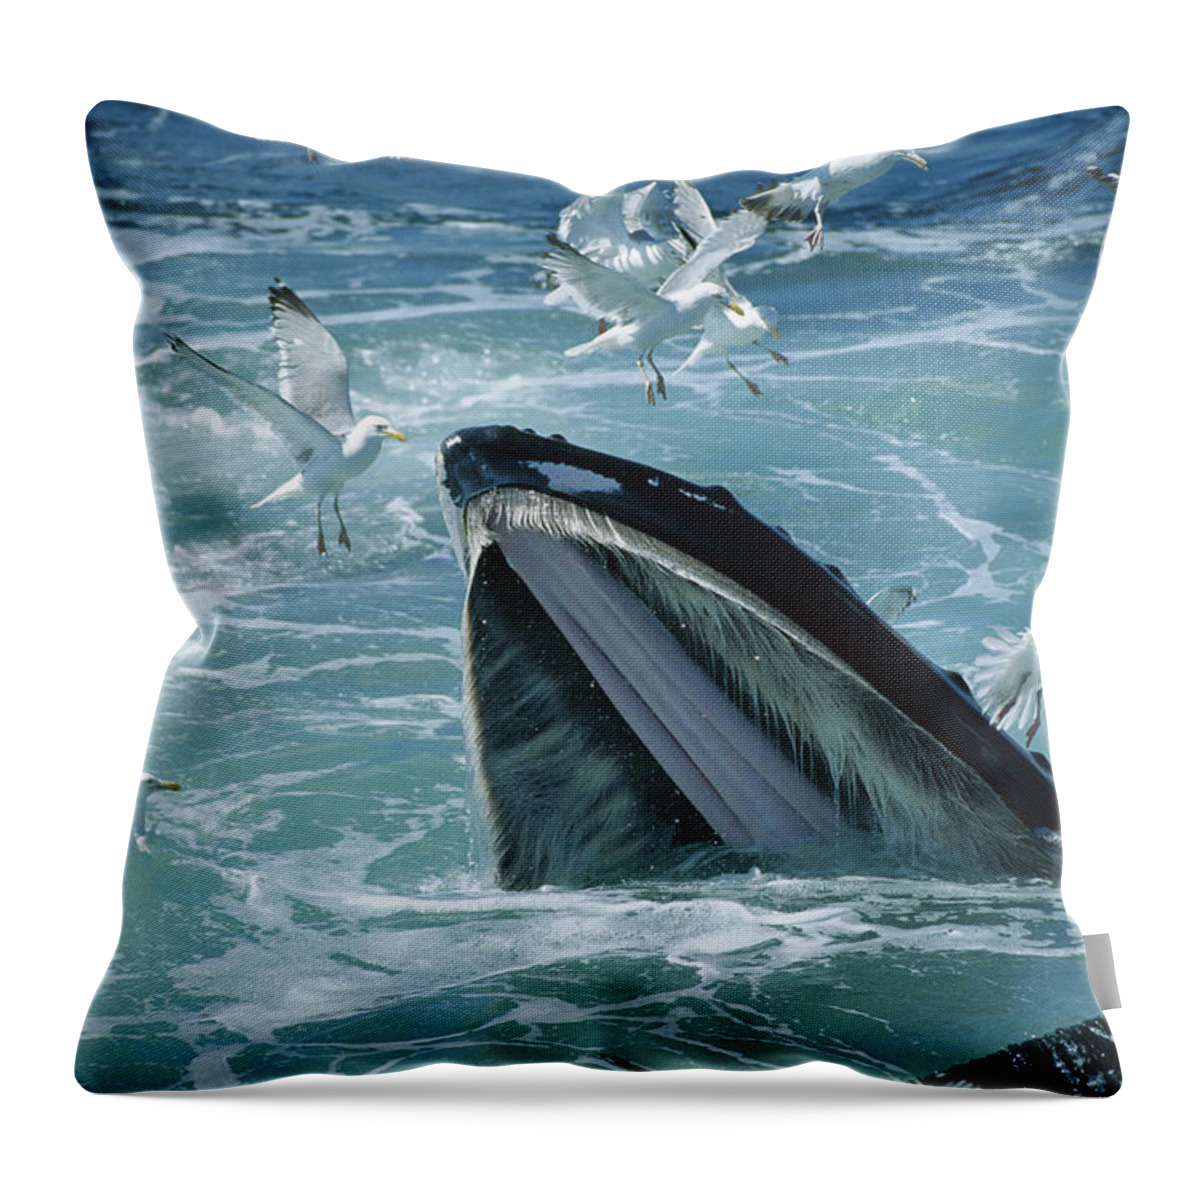 00126214 Throw Pillow featuring the photograph Humpback Whale Feeding With Herring by Flip Nicklin